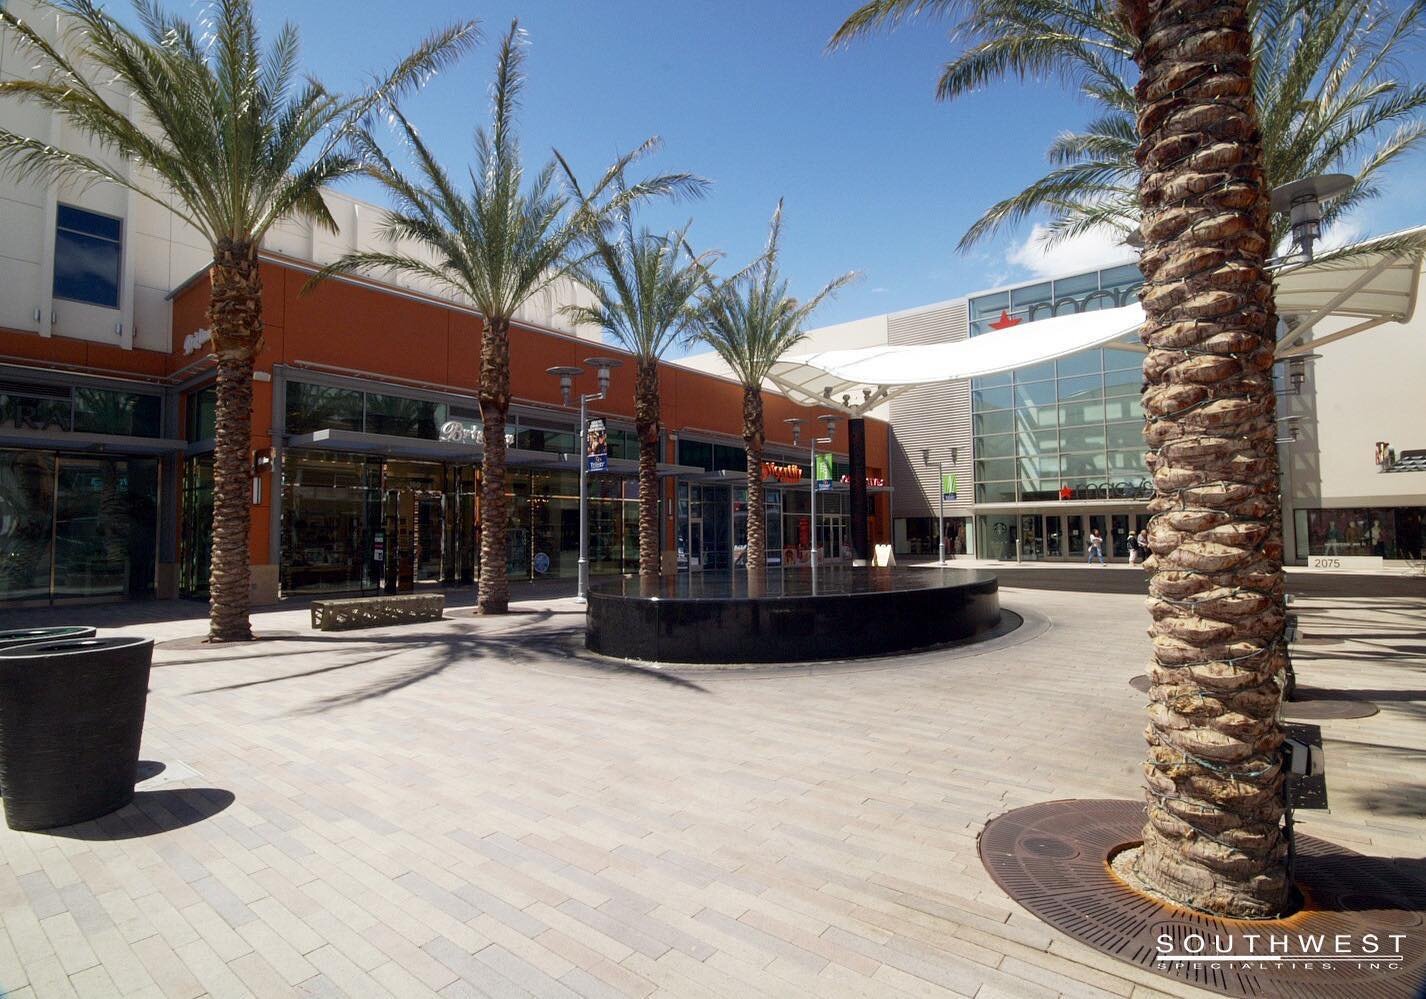 #FBF to our work at @downtownsummerlin. So excited to see they have begun reopening!😎 #DTSummerlin #Summerlin